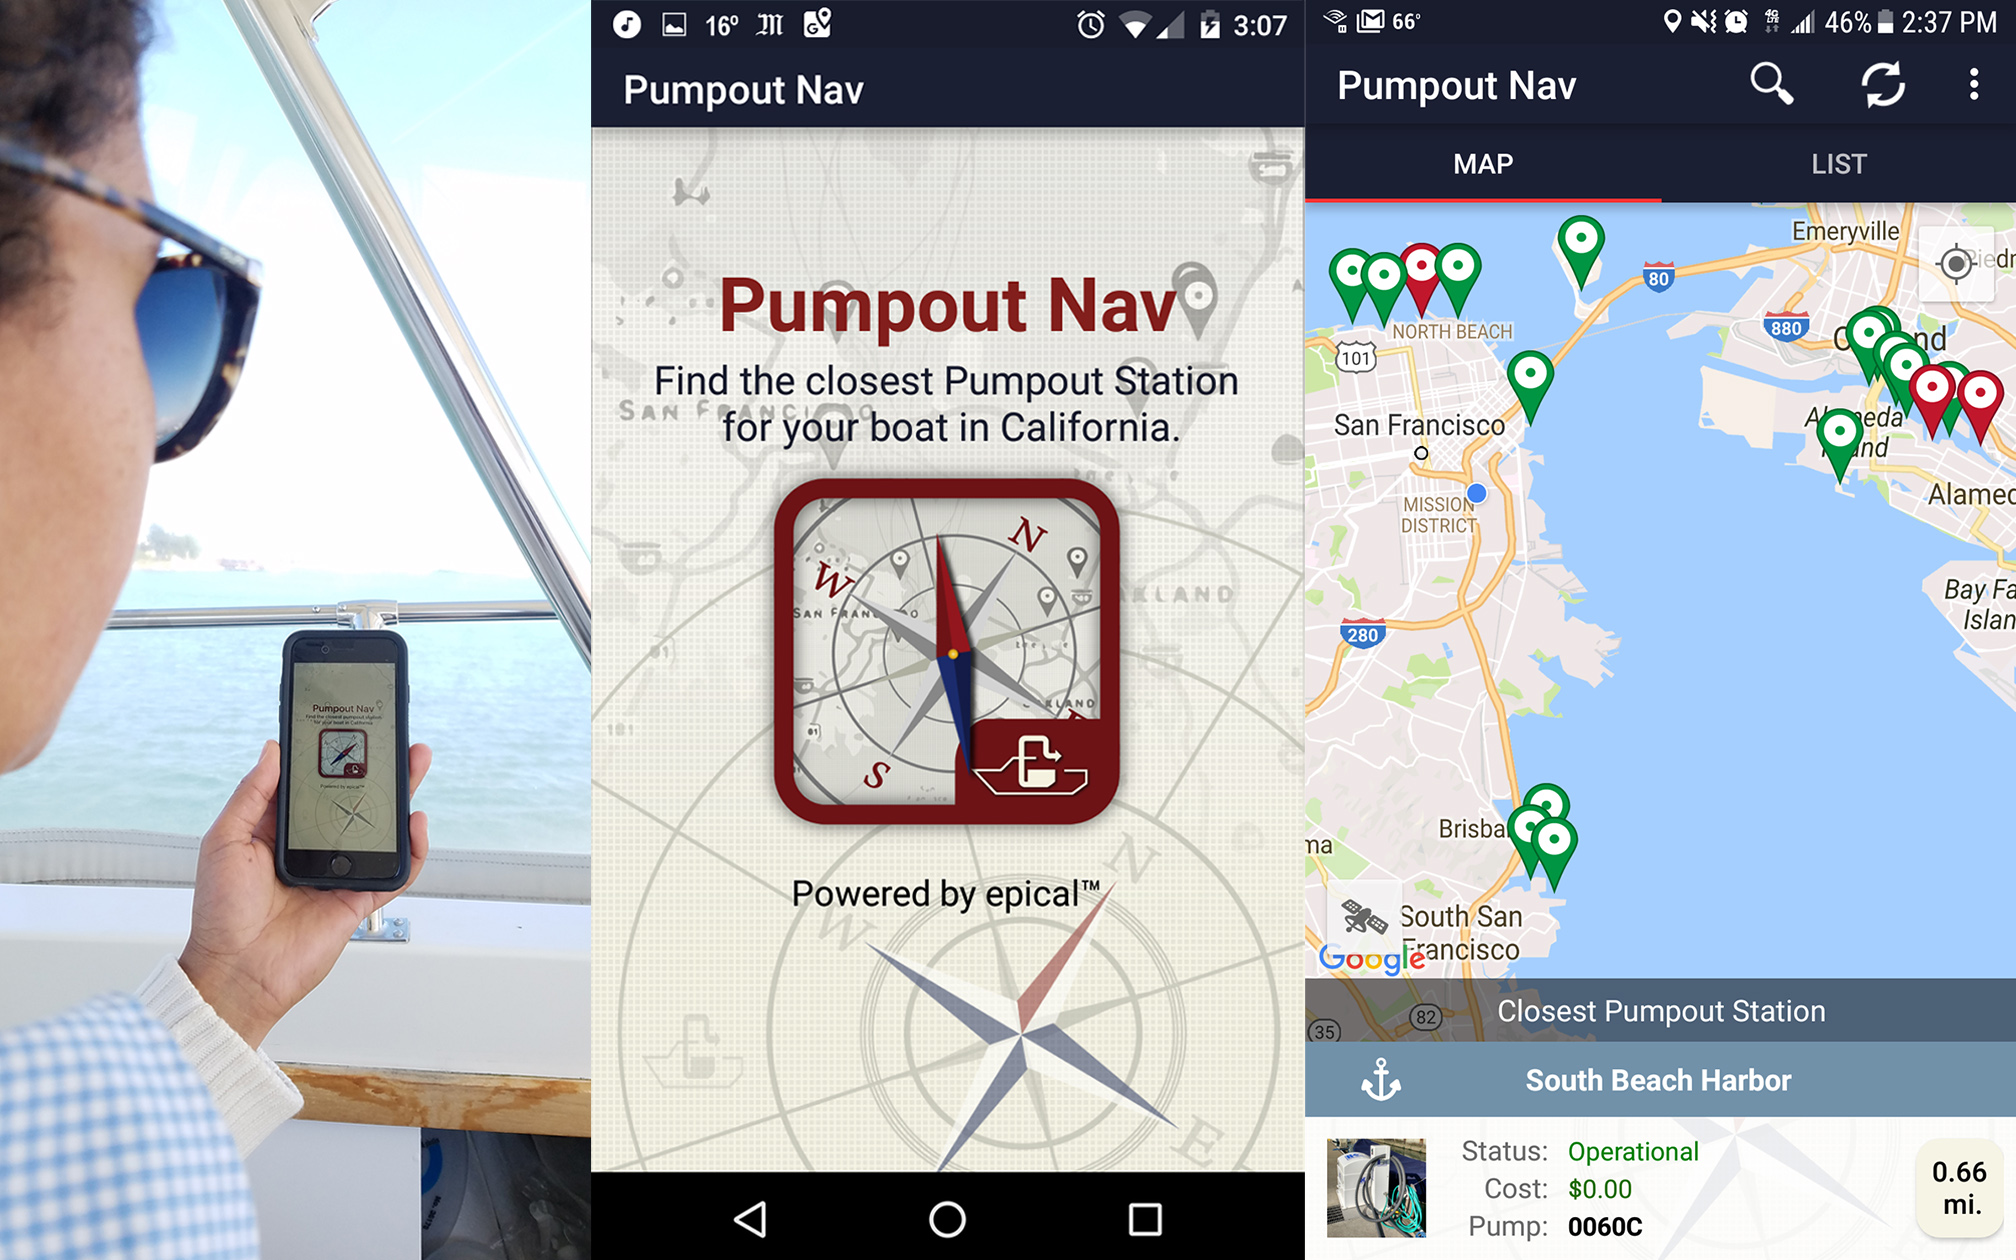 Images of Pumpout Nav app screens and app in use